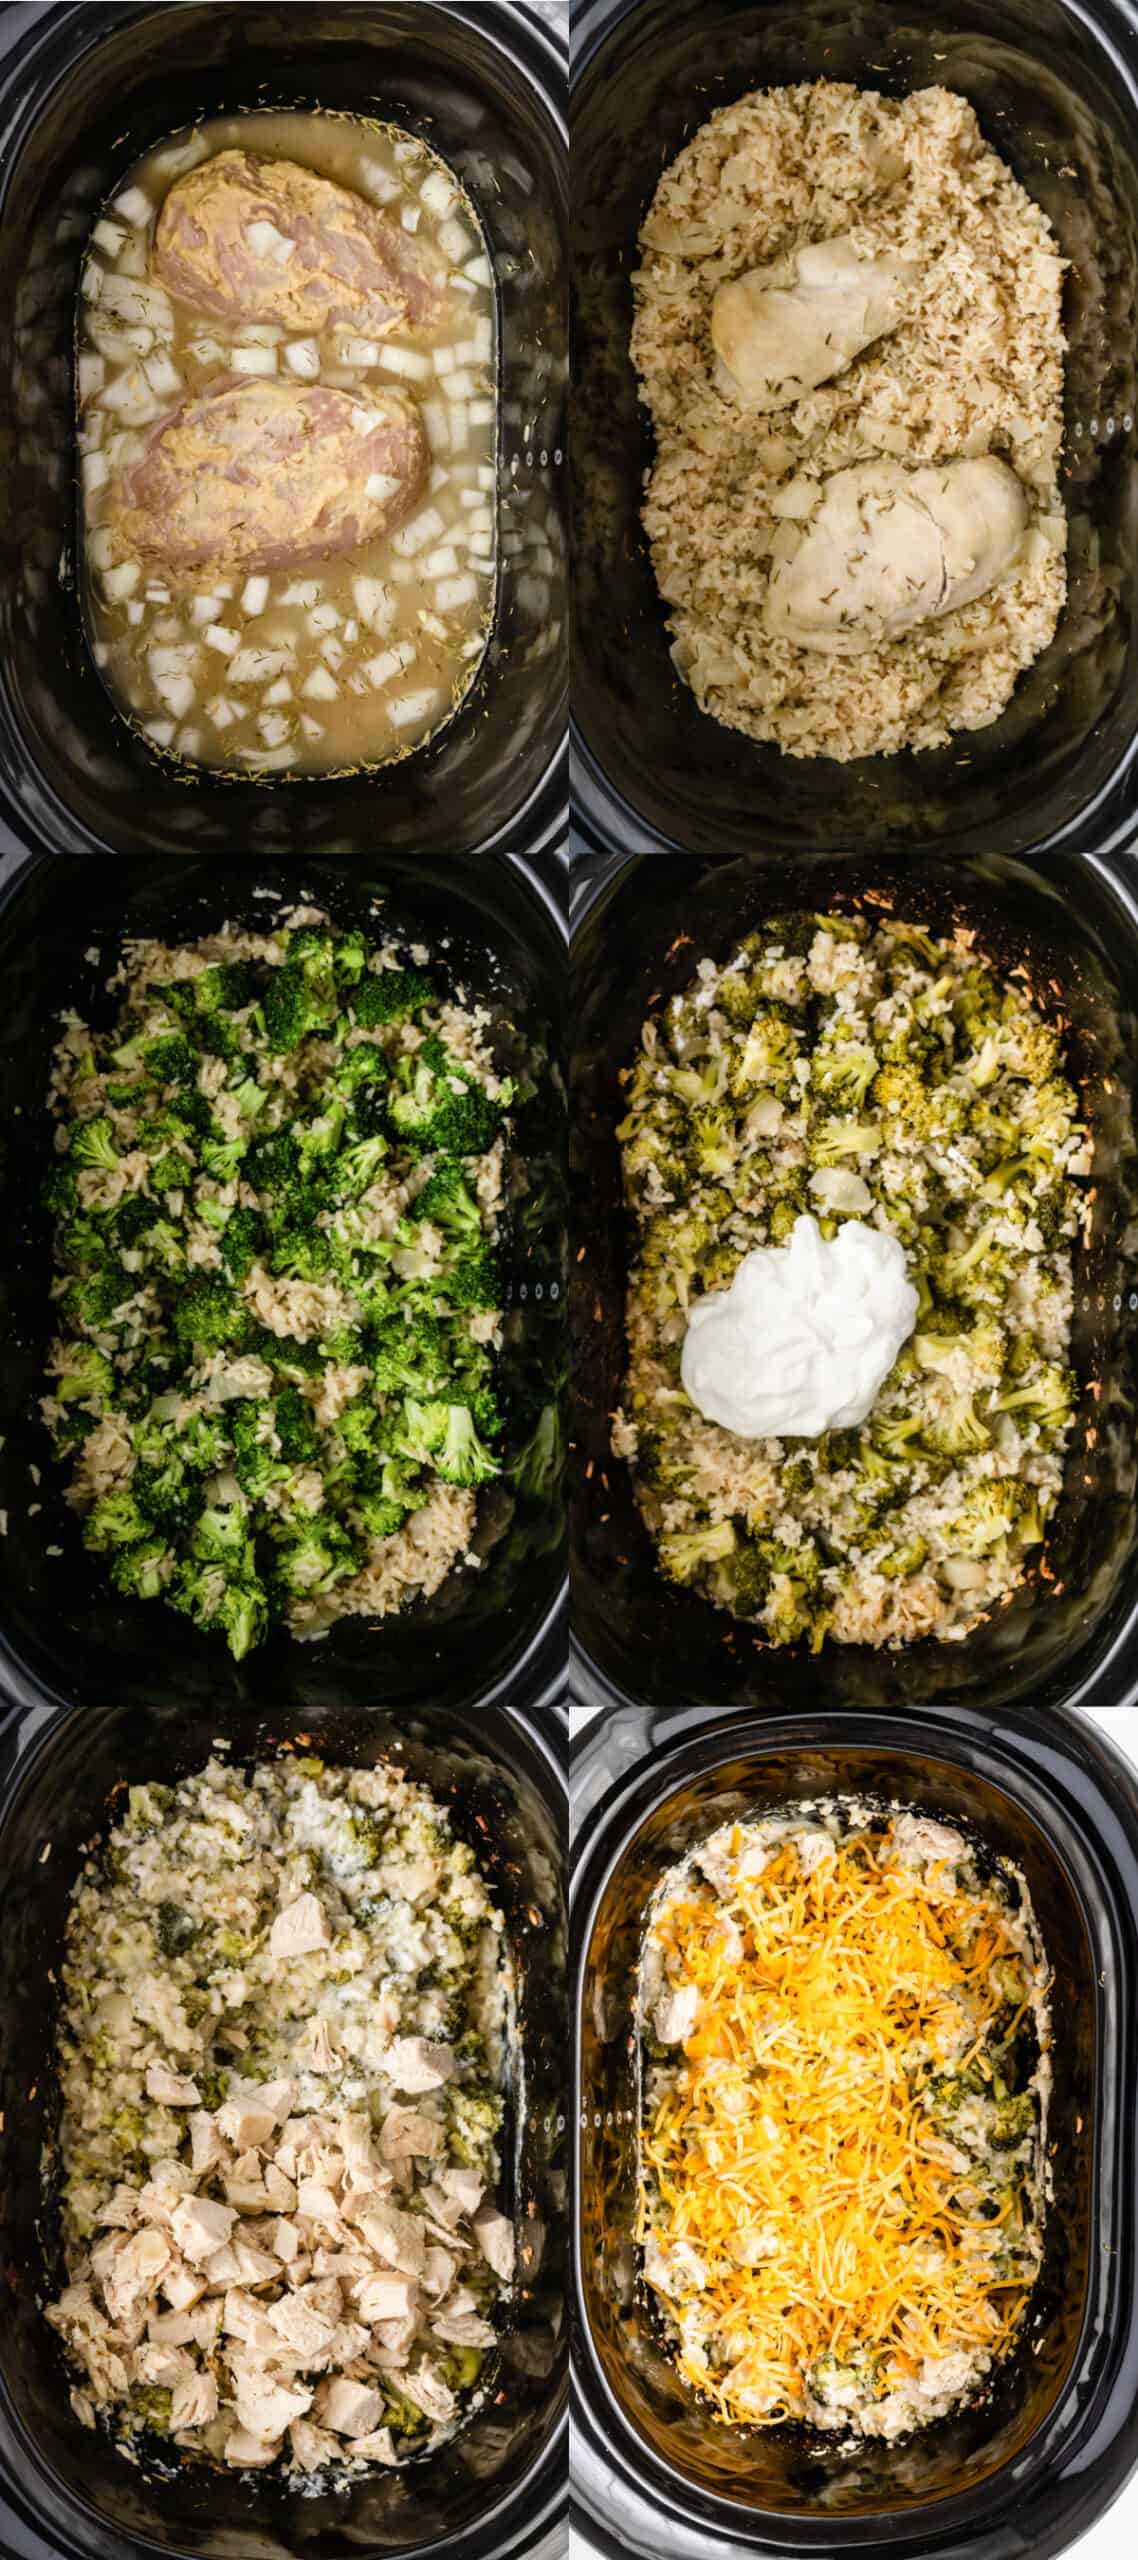 Cheesy Chicken and Rice Meal Prep Idea